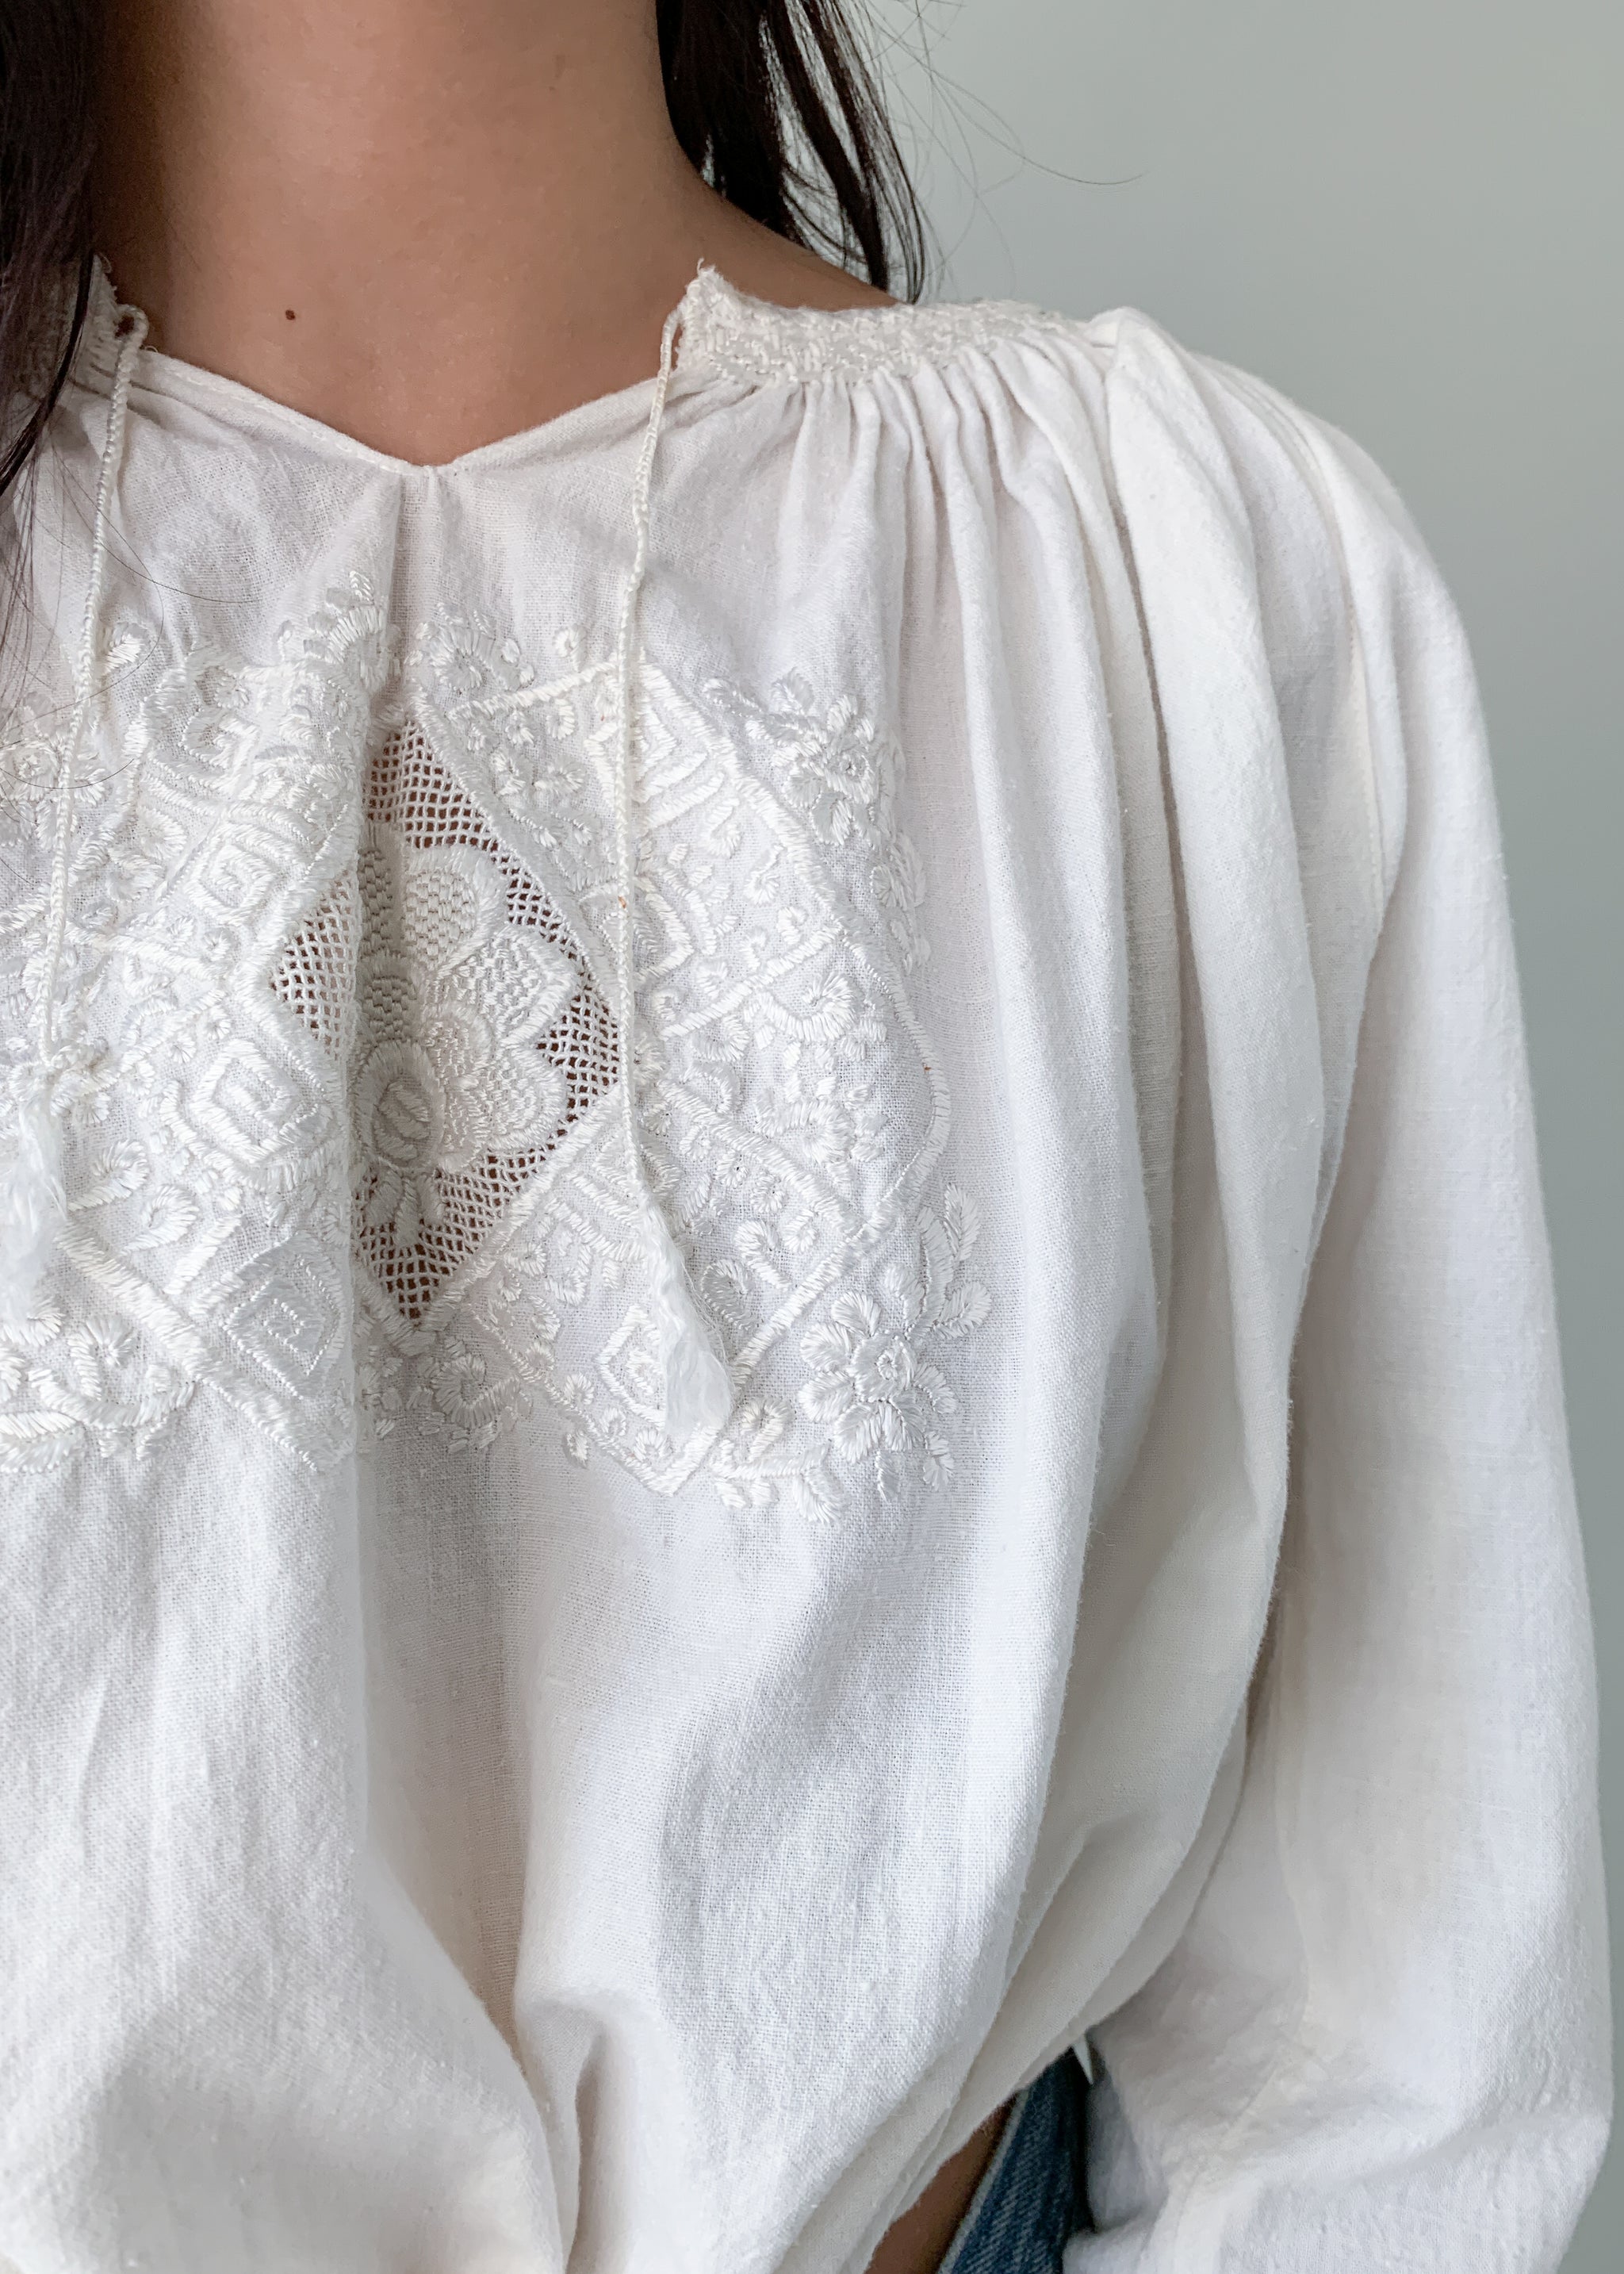 Vintage 1930s Embroidered Hungarian Top - Raleigh Vintage